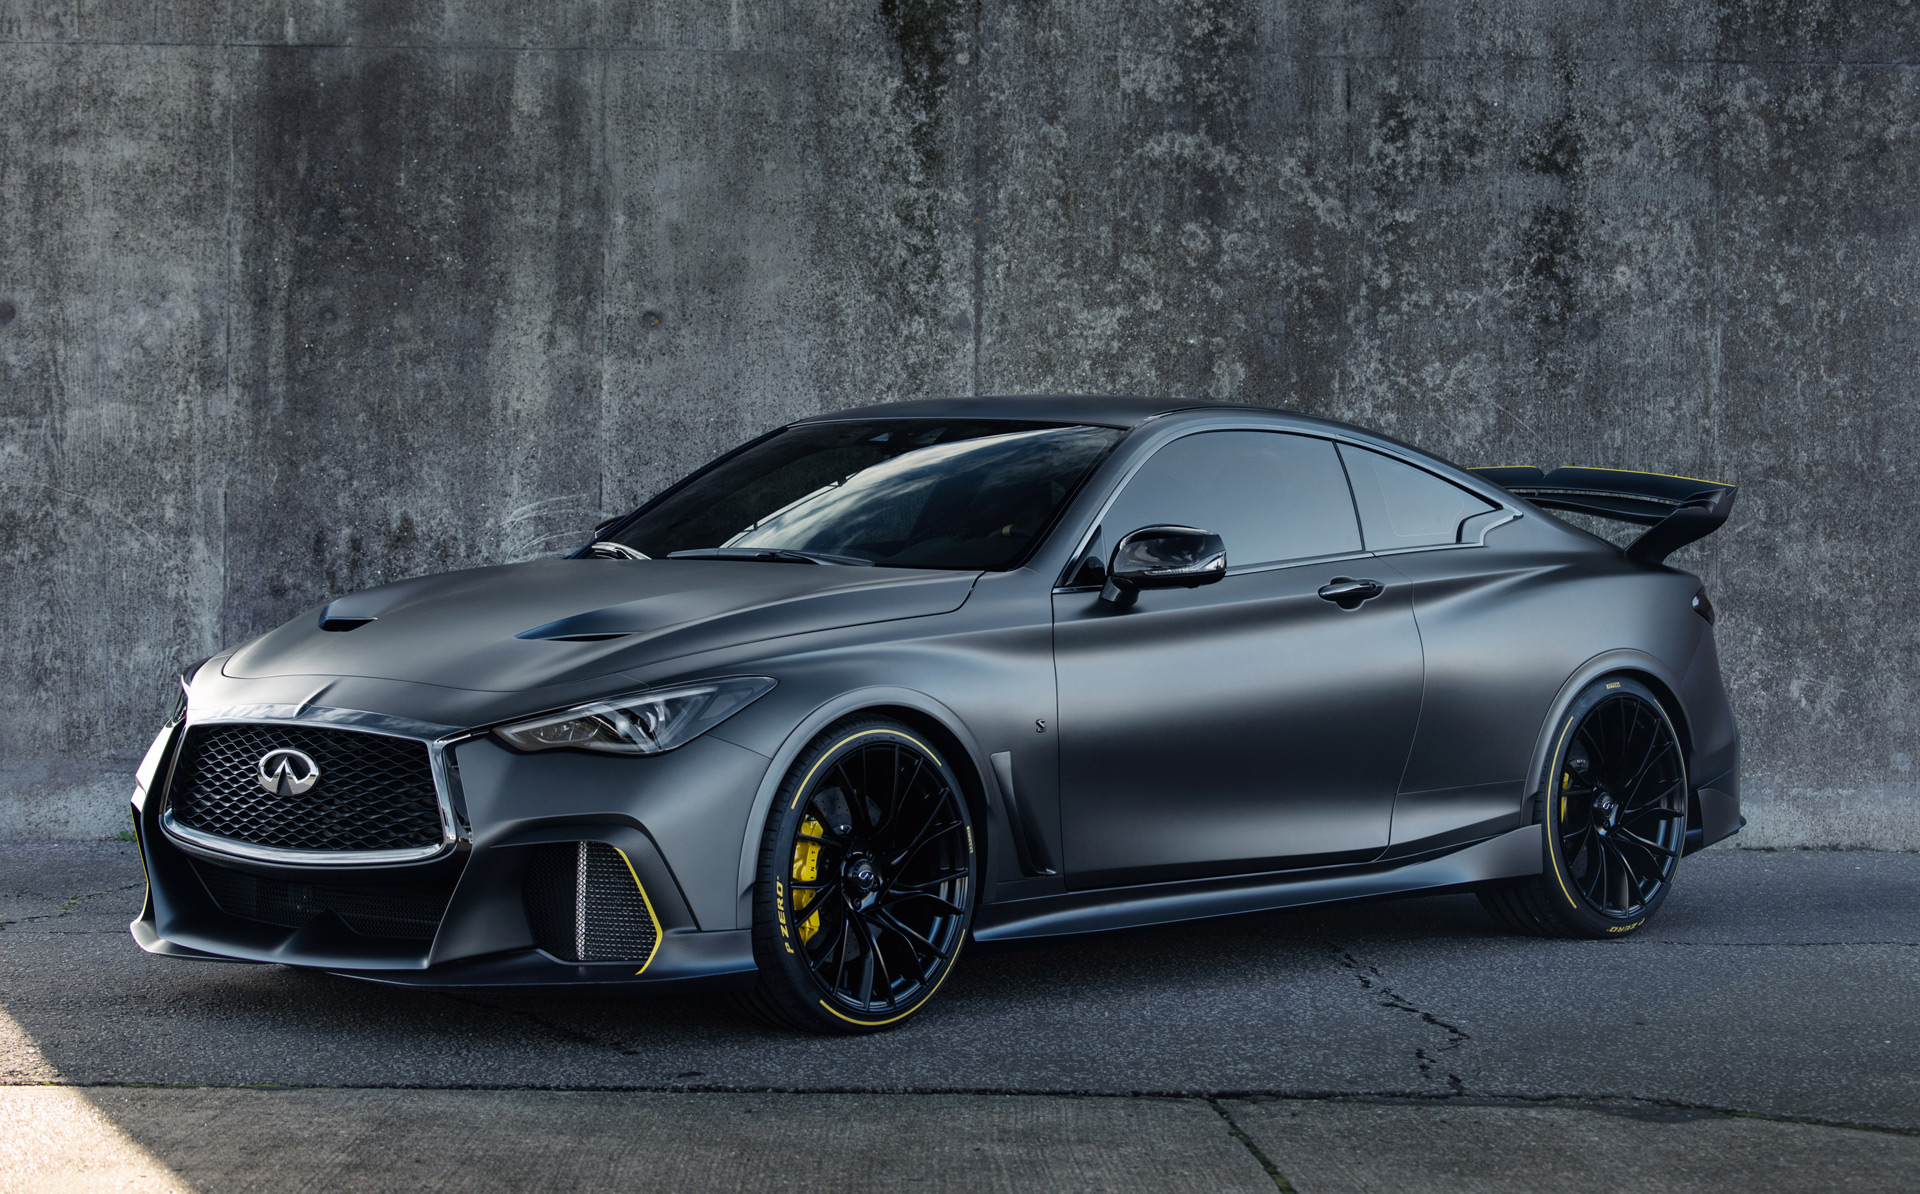 Decision on Infiniti Q60 Project Black S production due by end of 2019